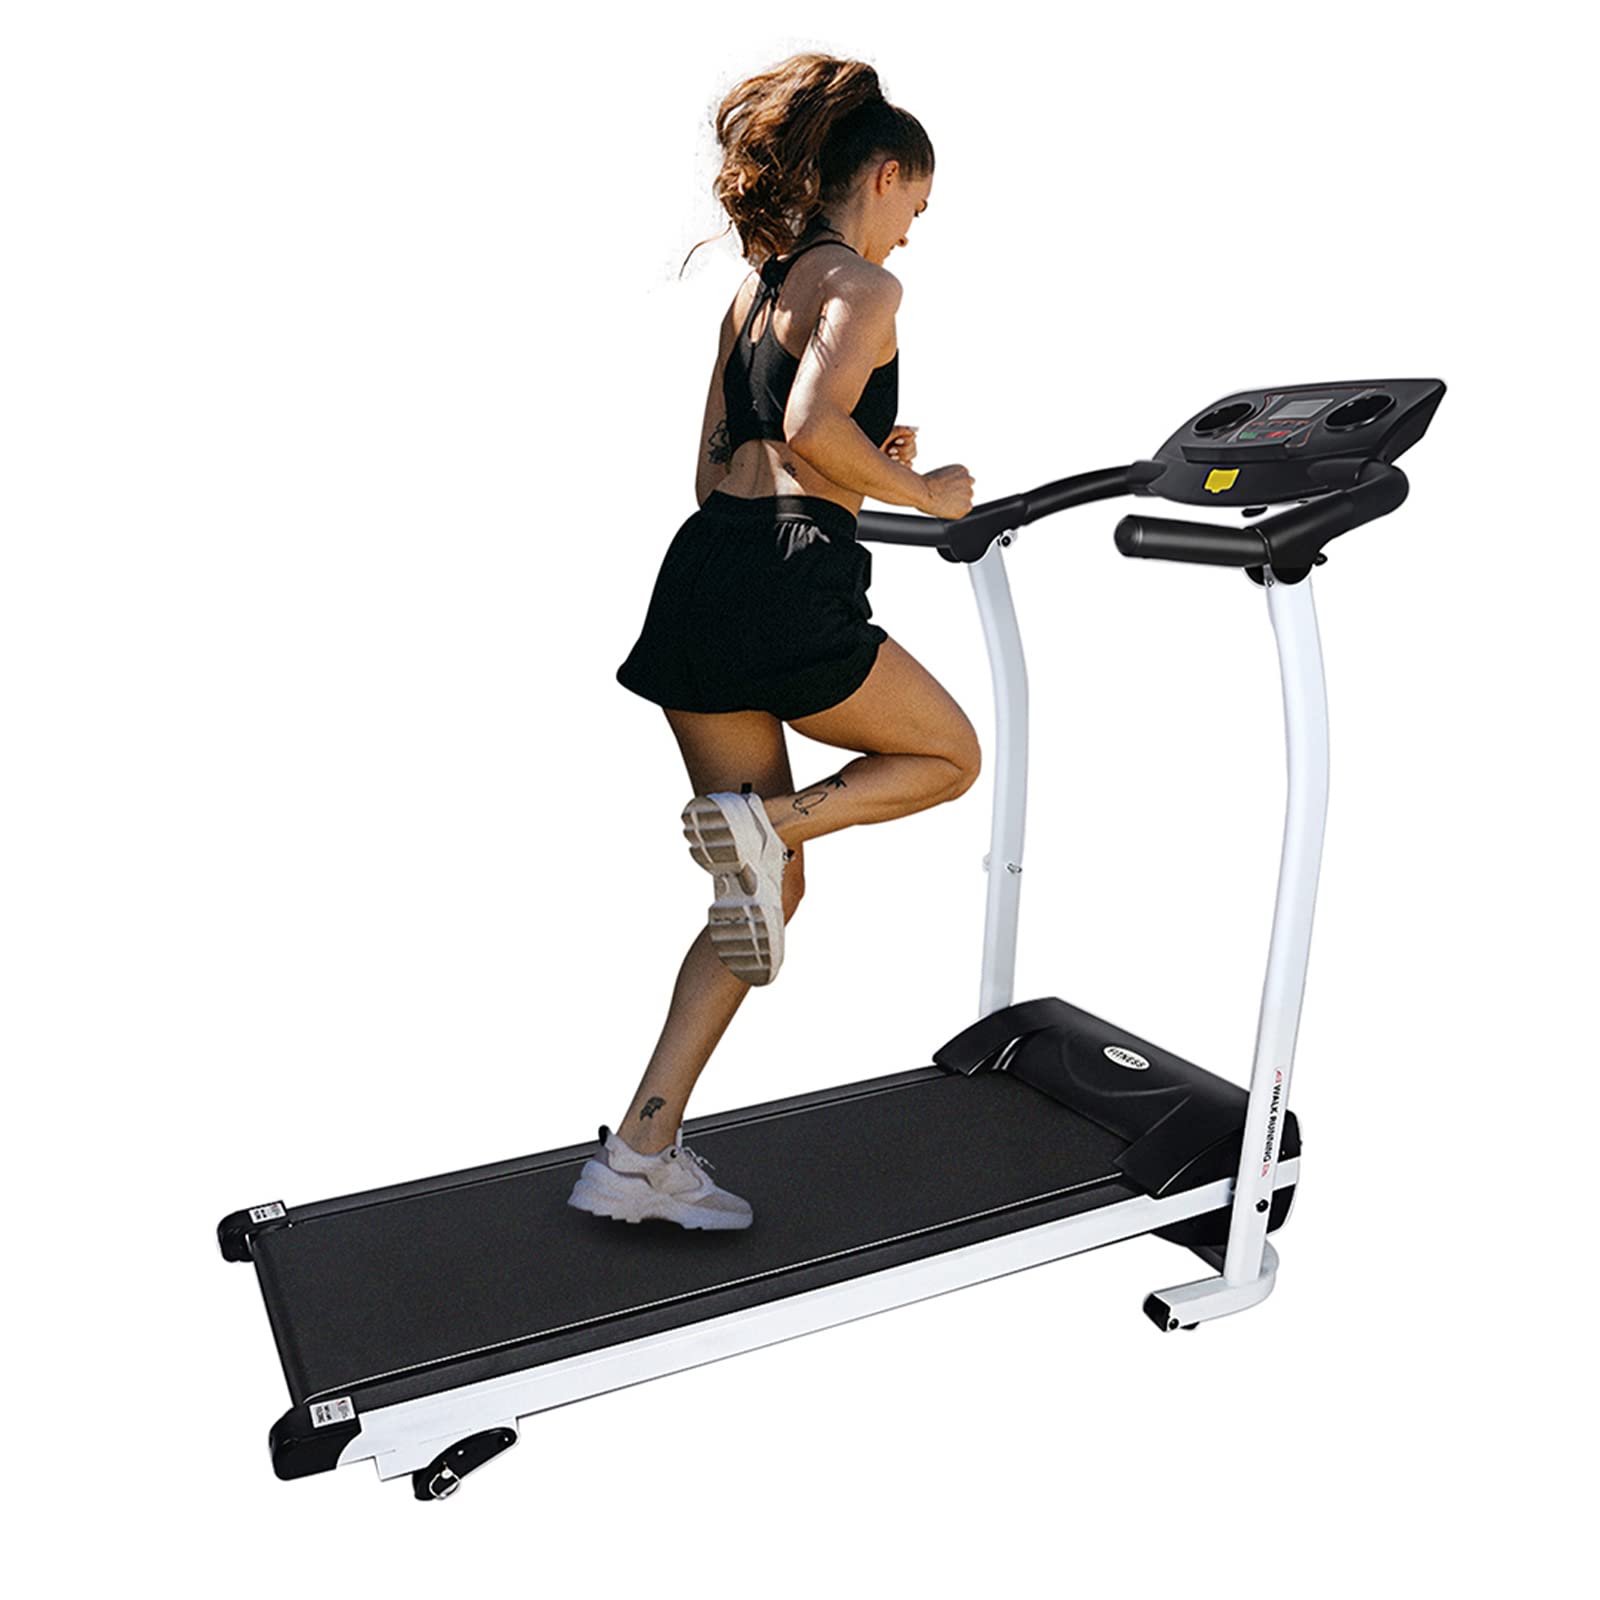 YSSOA High Performance Folding Treadmill, Workout Running Machine with LcD Display and Phone Slot, compact Treadmill for Fitness